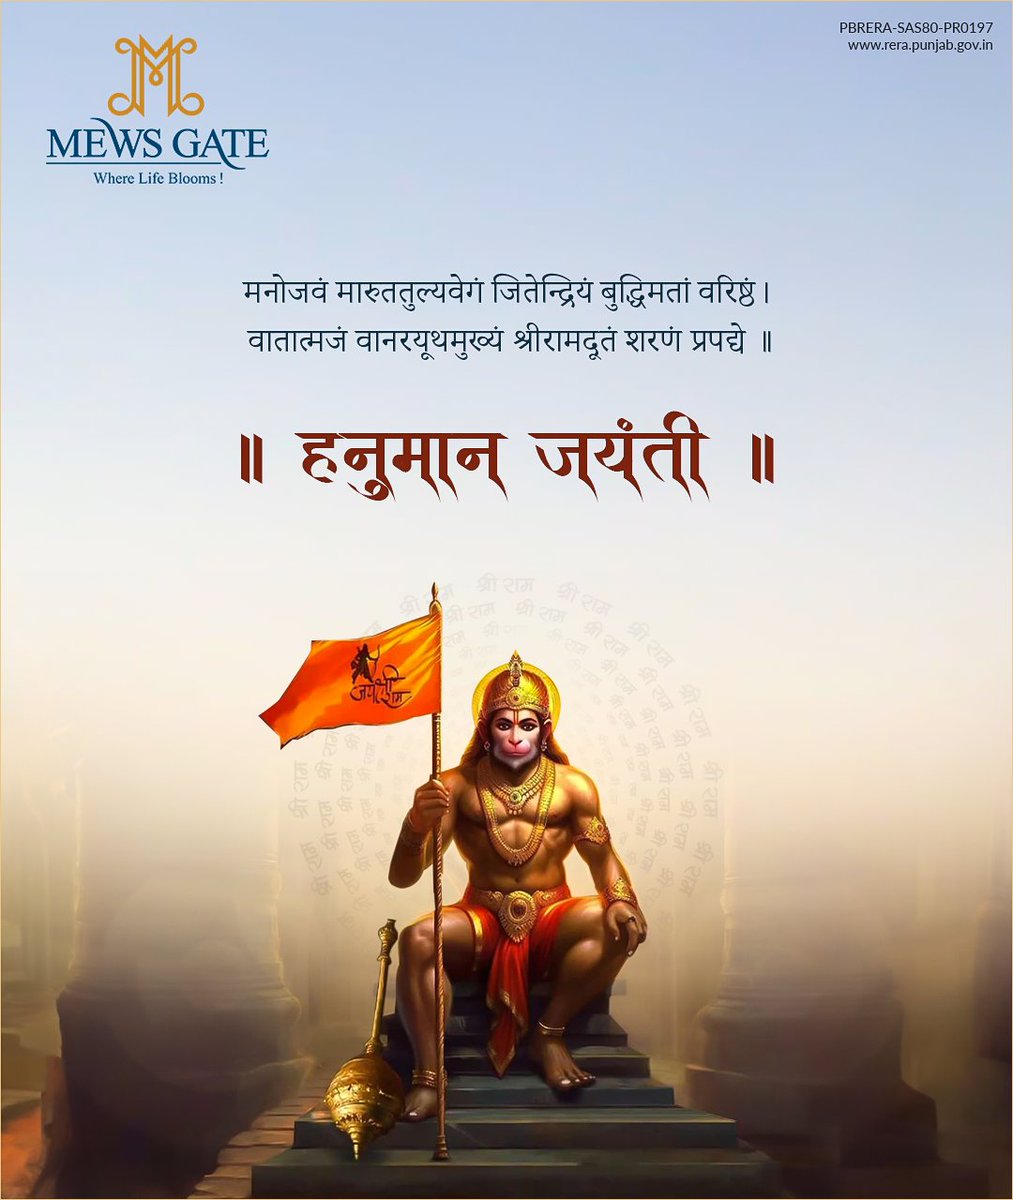 May the divine blessings of Lord Hanuman bring you strength, courage, and wisdom on this auspicious day and always. #MewsGate #Courage #JaiHanuman #Devotion #HanumanChalisa #HanumanJayanti2024 #Blessings #DivineDevotion #LordHanuman